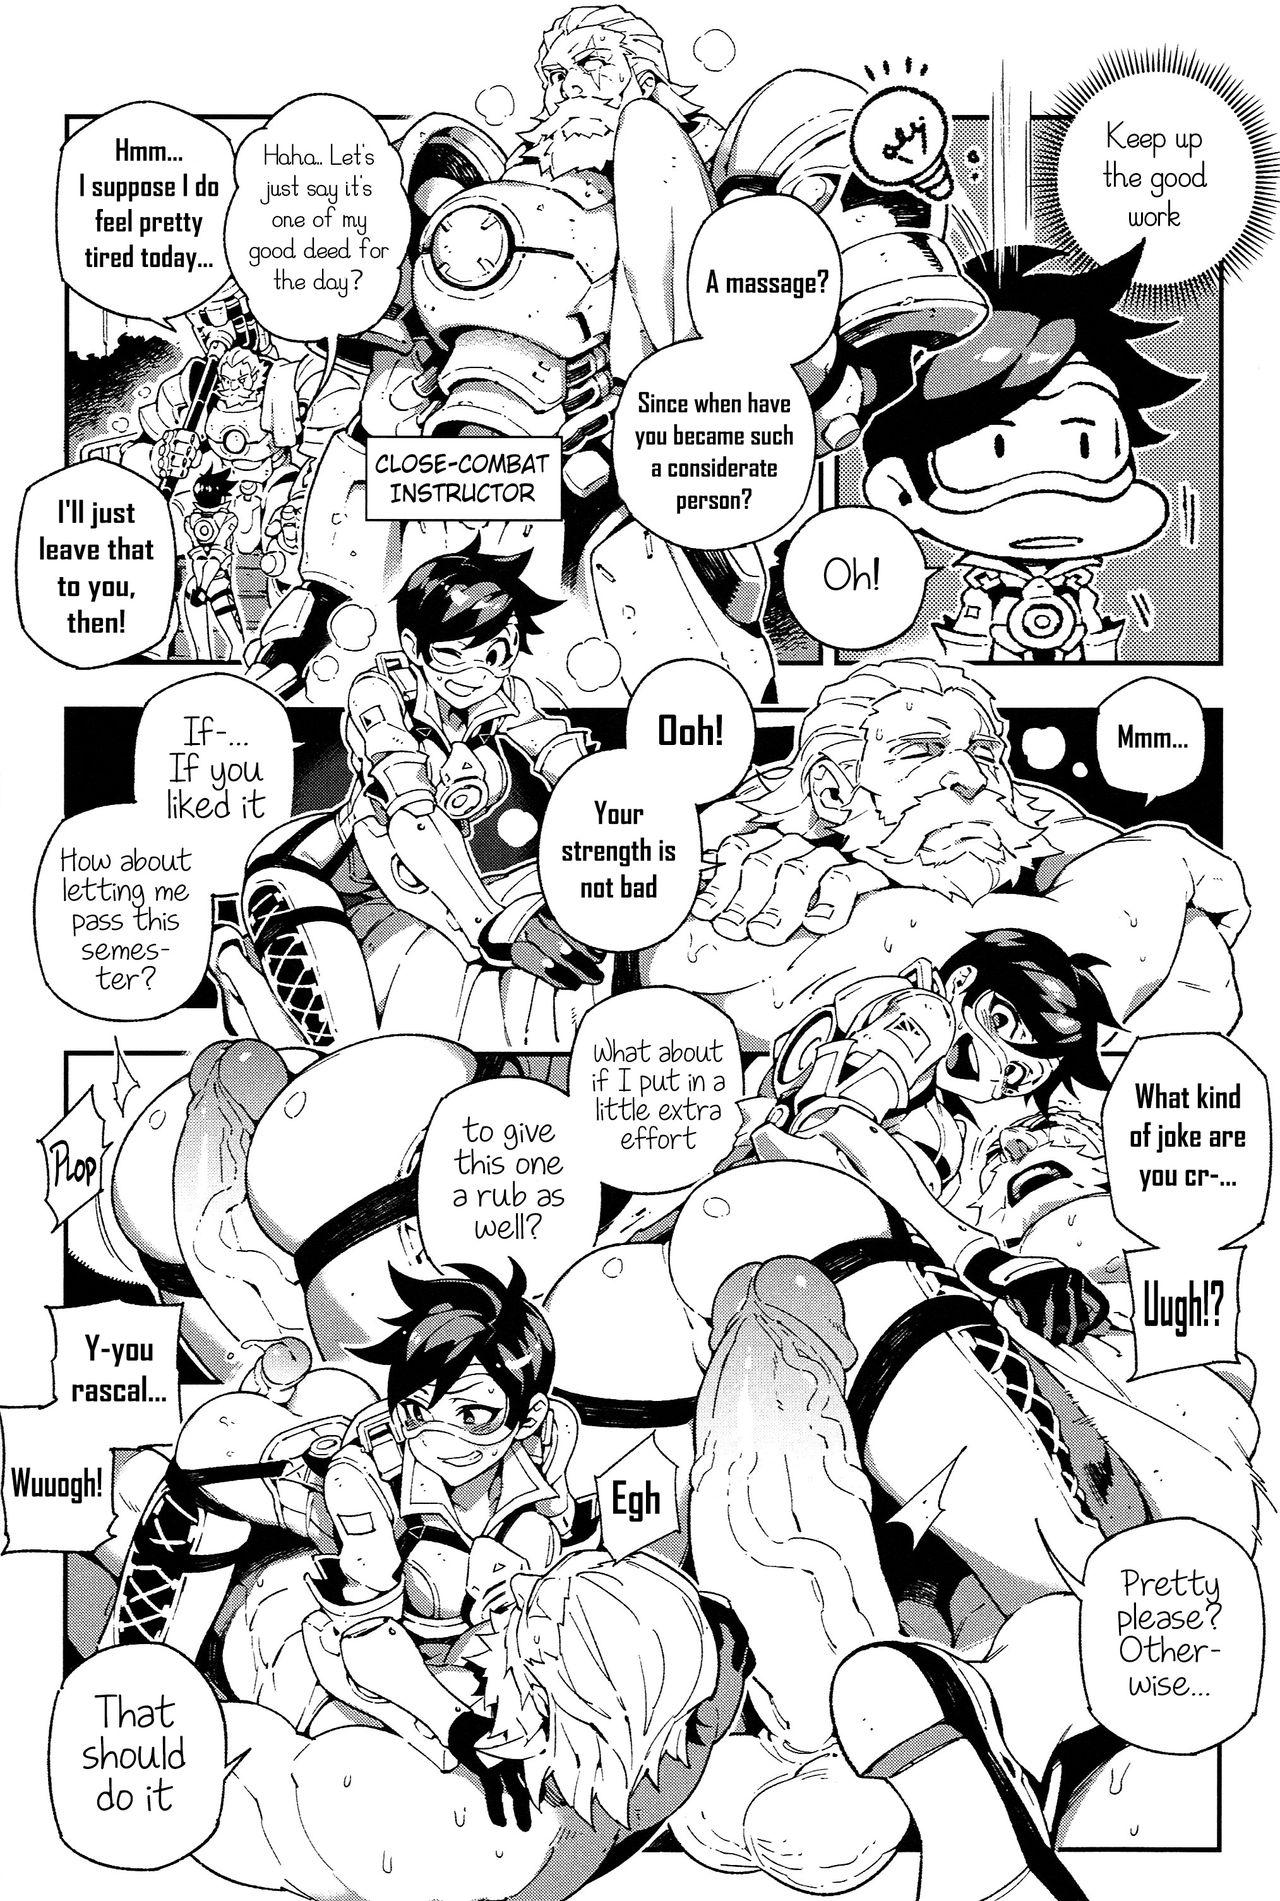 Whooty OVERTIME!! OVERWATCH FANBOOK VOL.1 - Overwatch Fit - Page 7